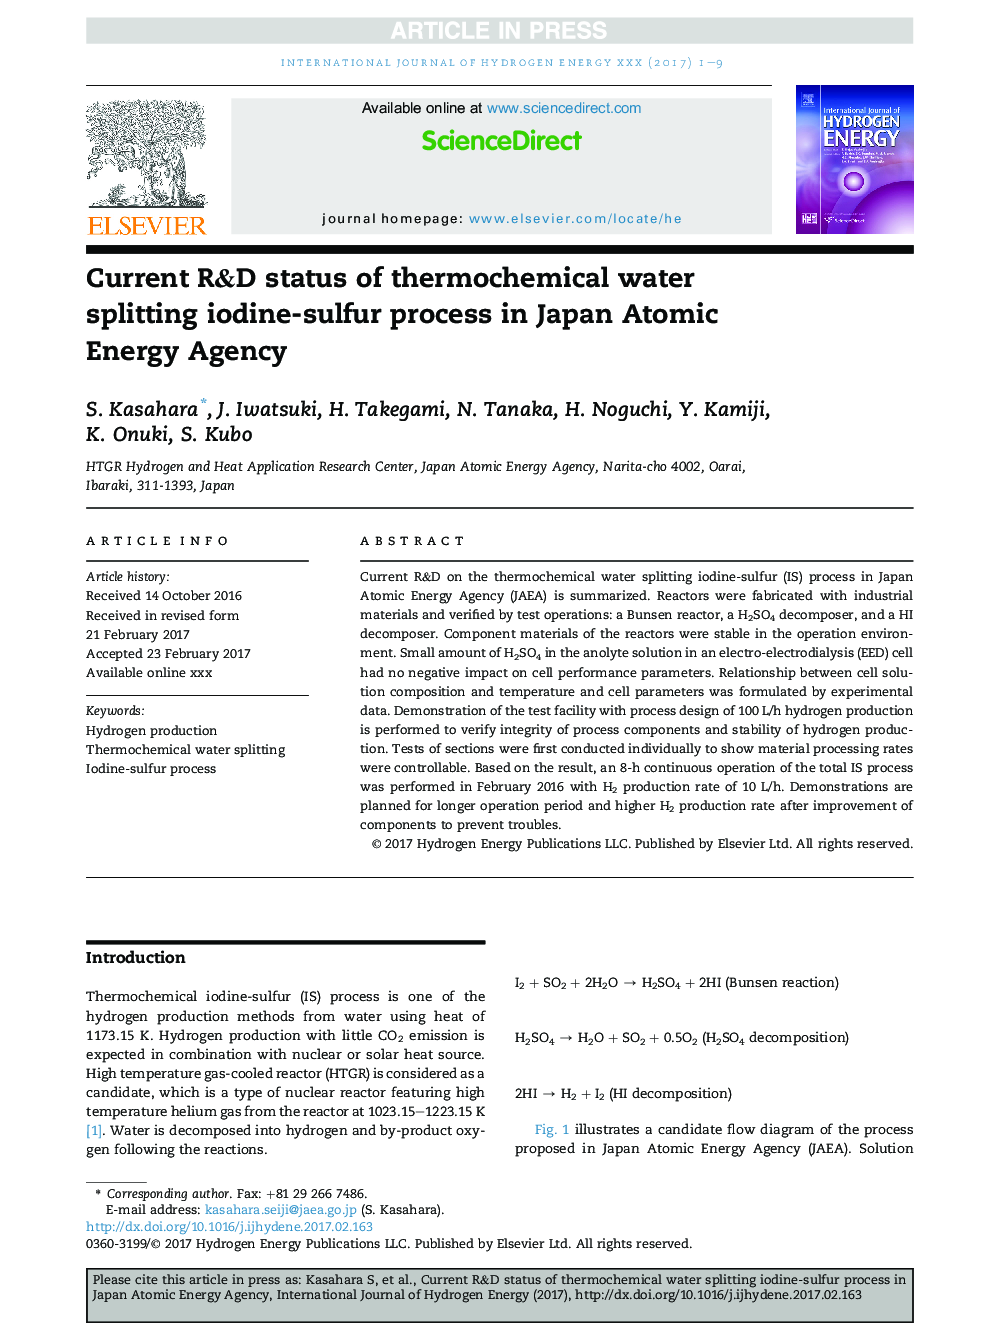 Current R&D status of thermochemical water splitting iodine-sulfur process in Japan Atomic Energy Agency